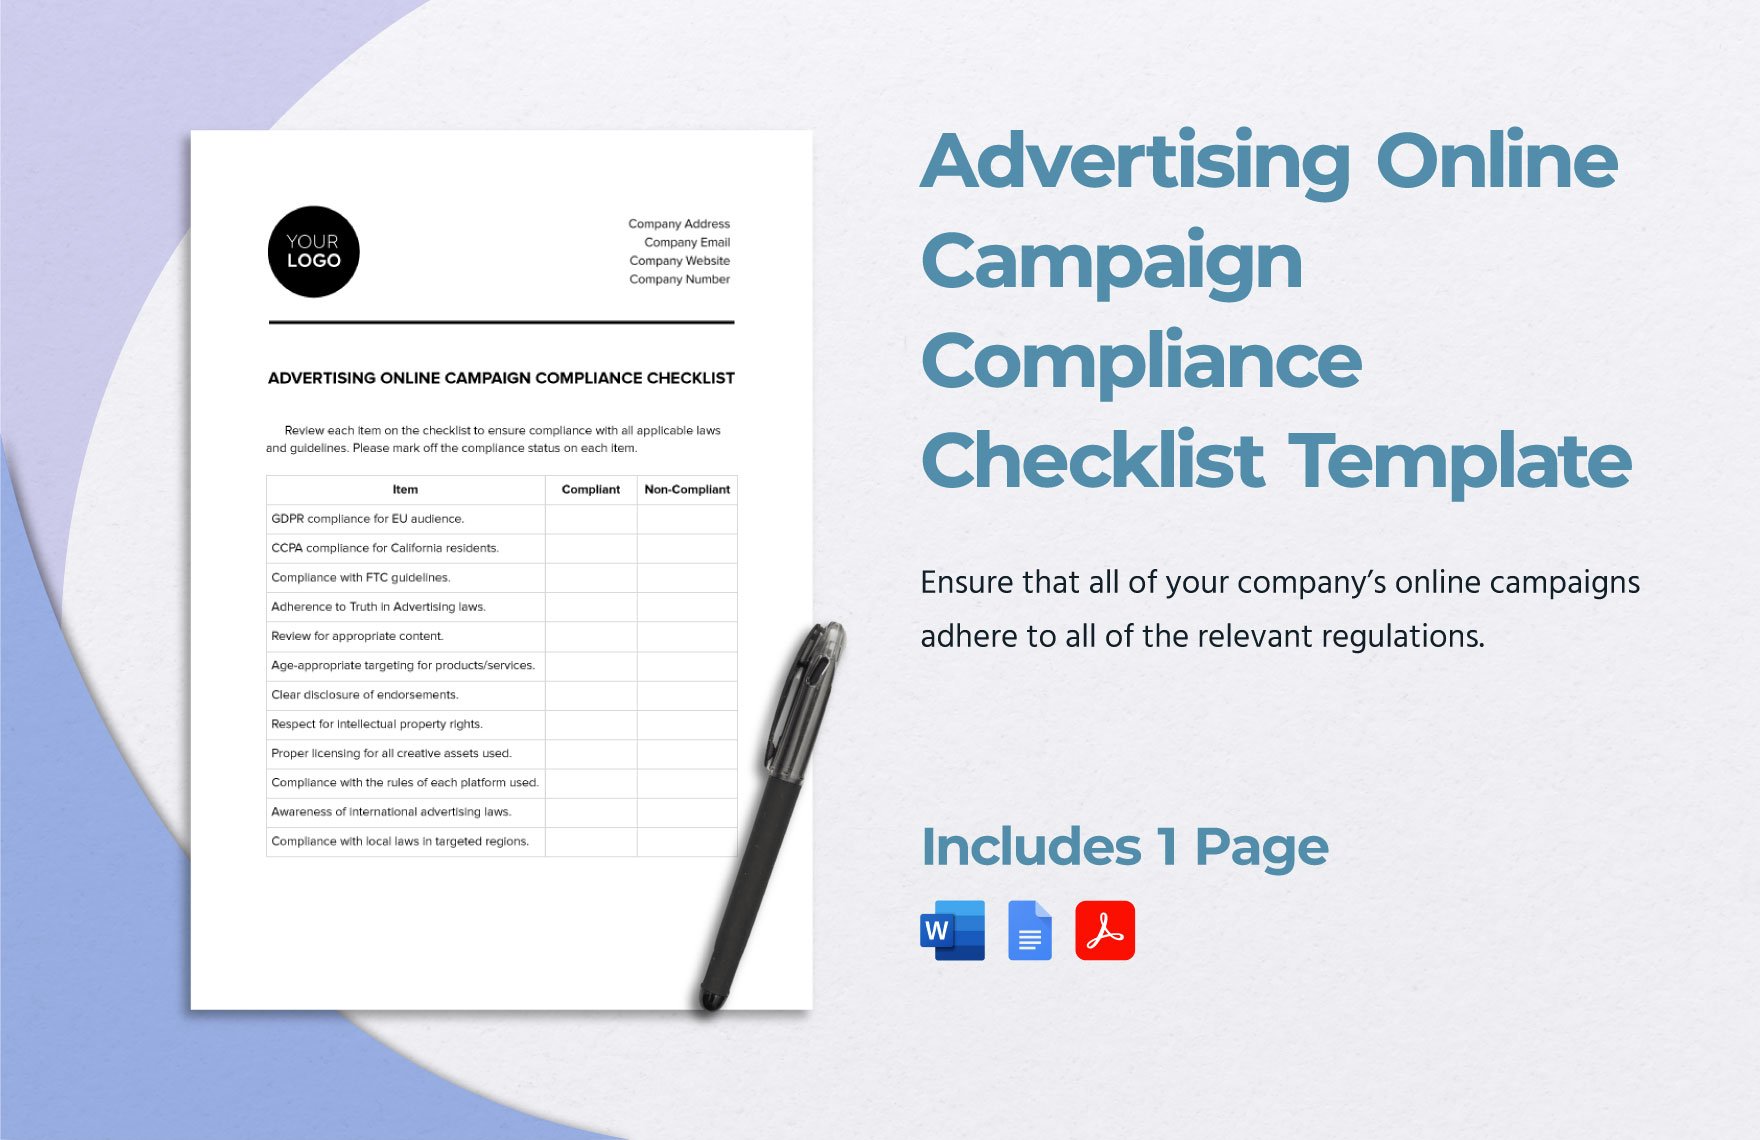 Advertising Online Campaign Compliance Checklist Template in Word, Google Docs, PDF